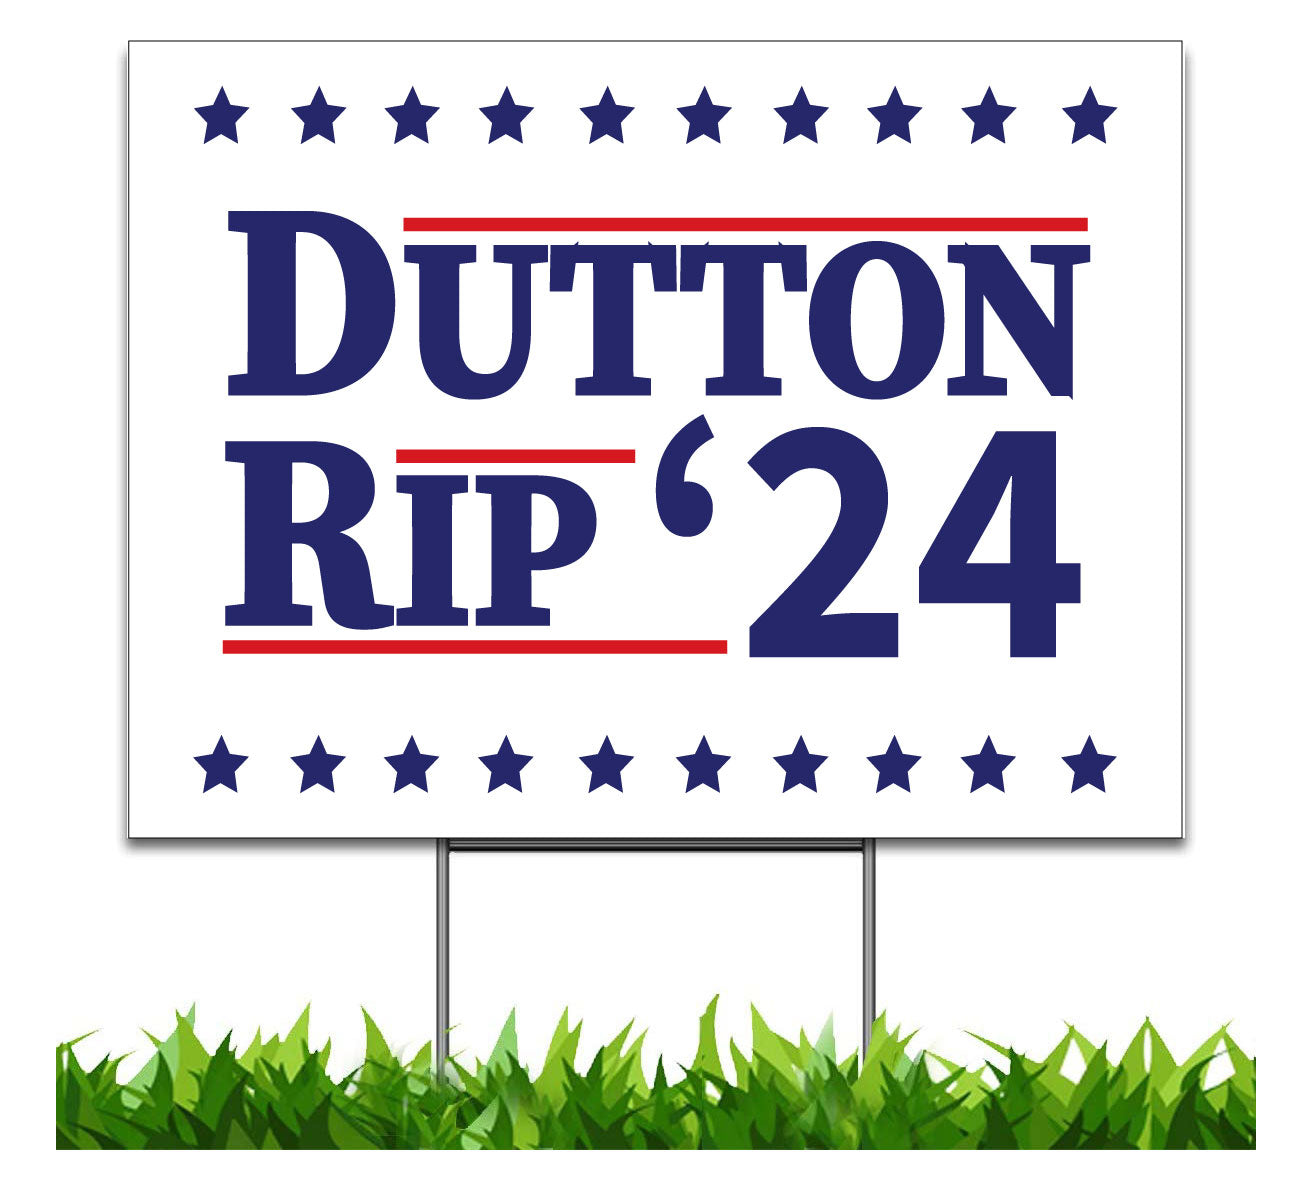 Dutton, Rip 2024, v2 Yard Sign, Printed 2-Sided 18x12, 24x18 or 36x24, Metal H-Stake Included, v1